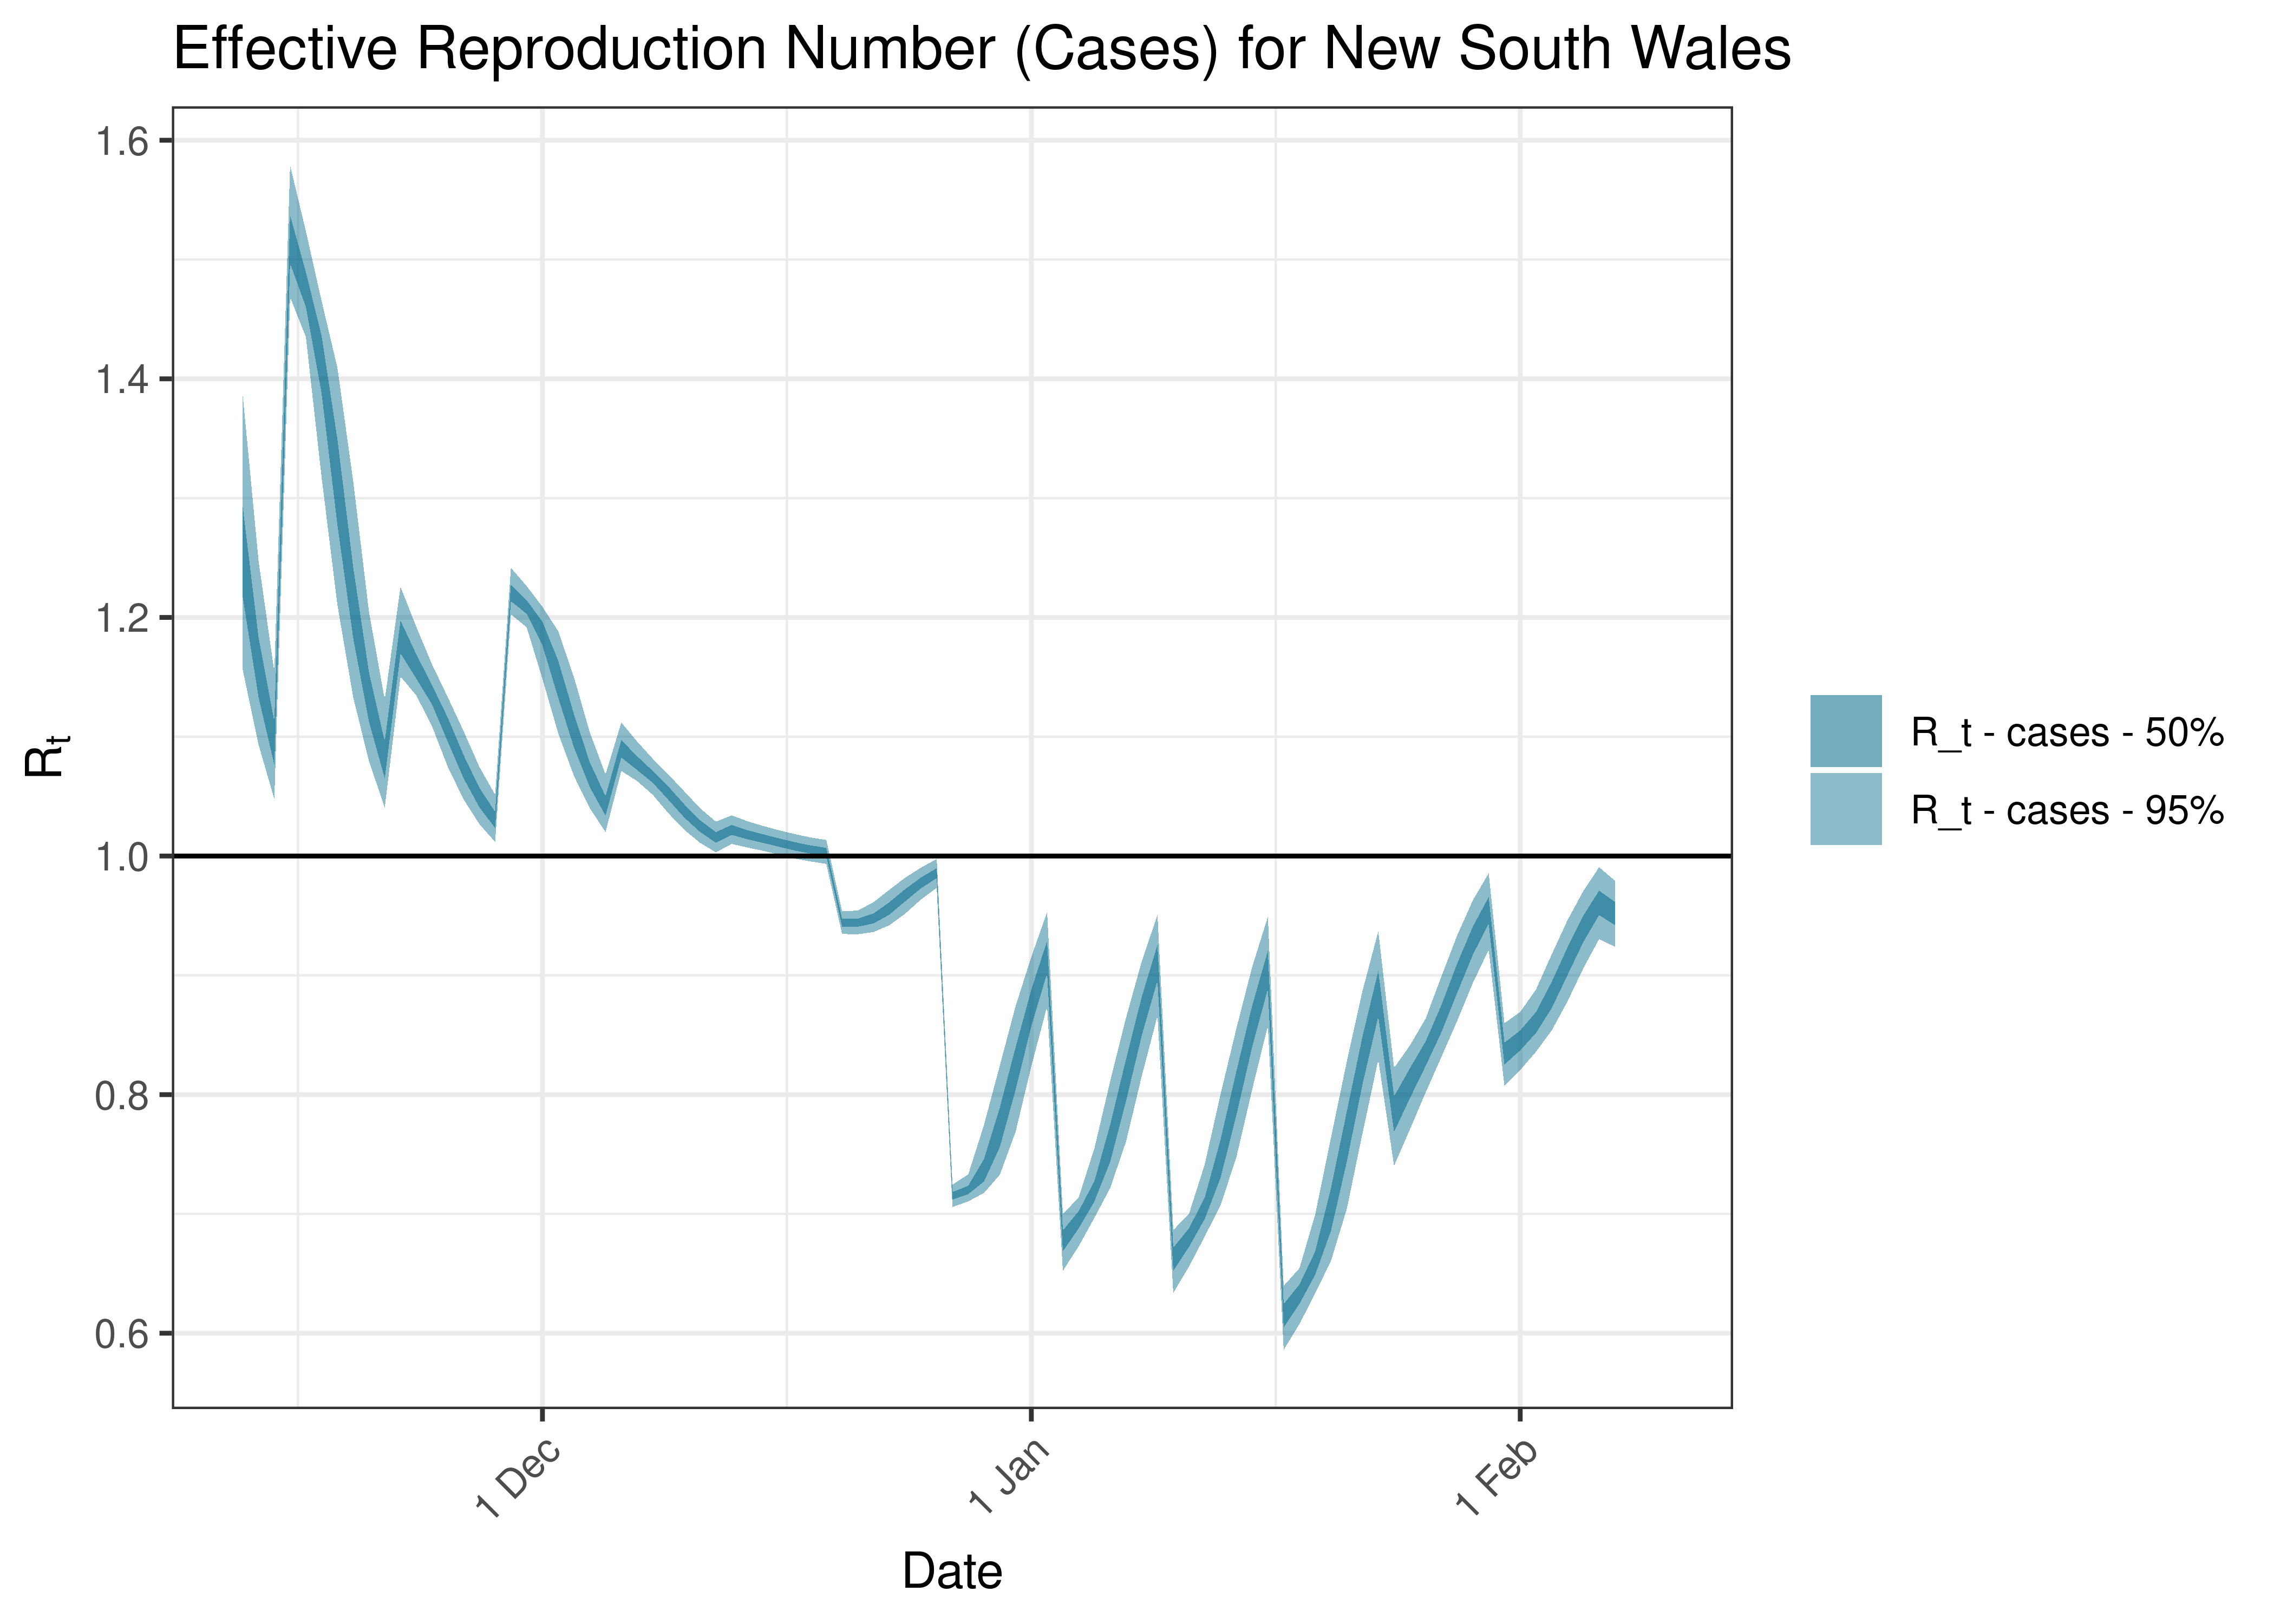 Estimated Effective Reproduction Number Based on Cases for New South Wales over last 90 days